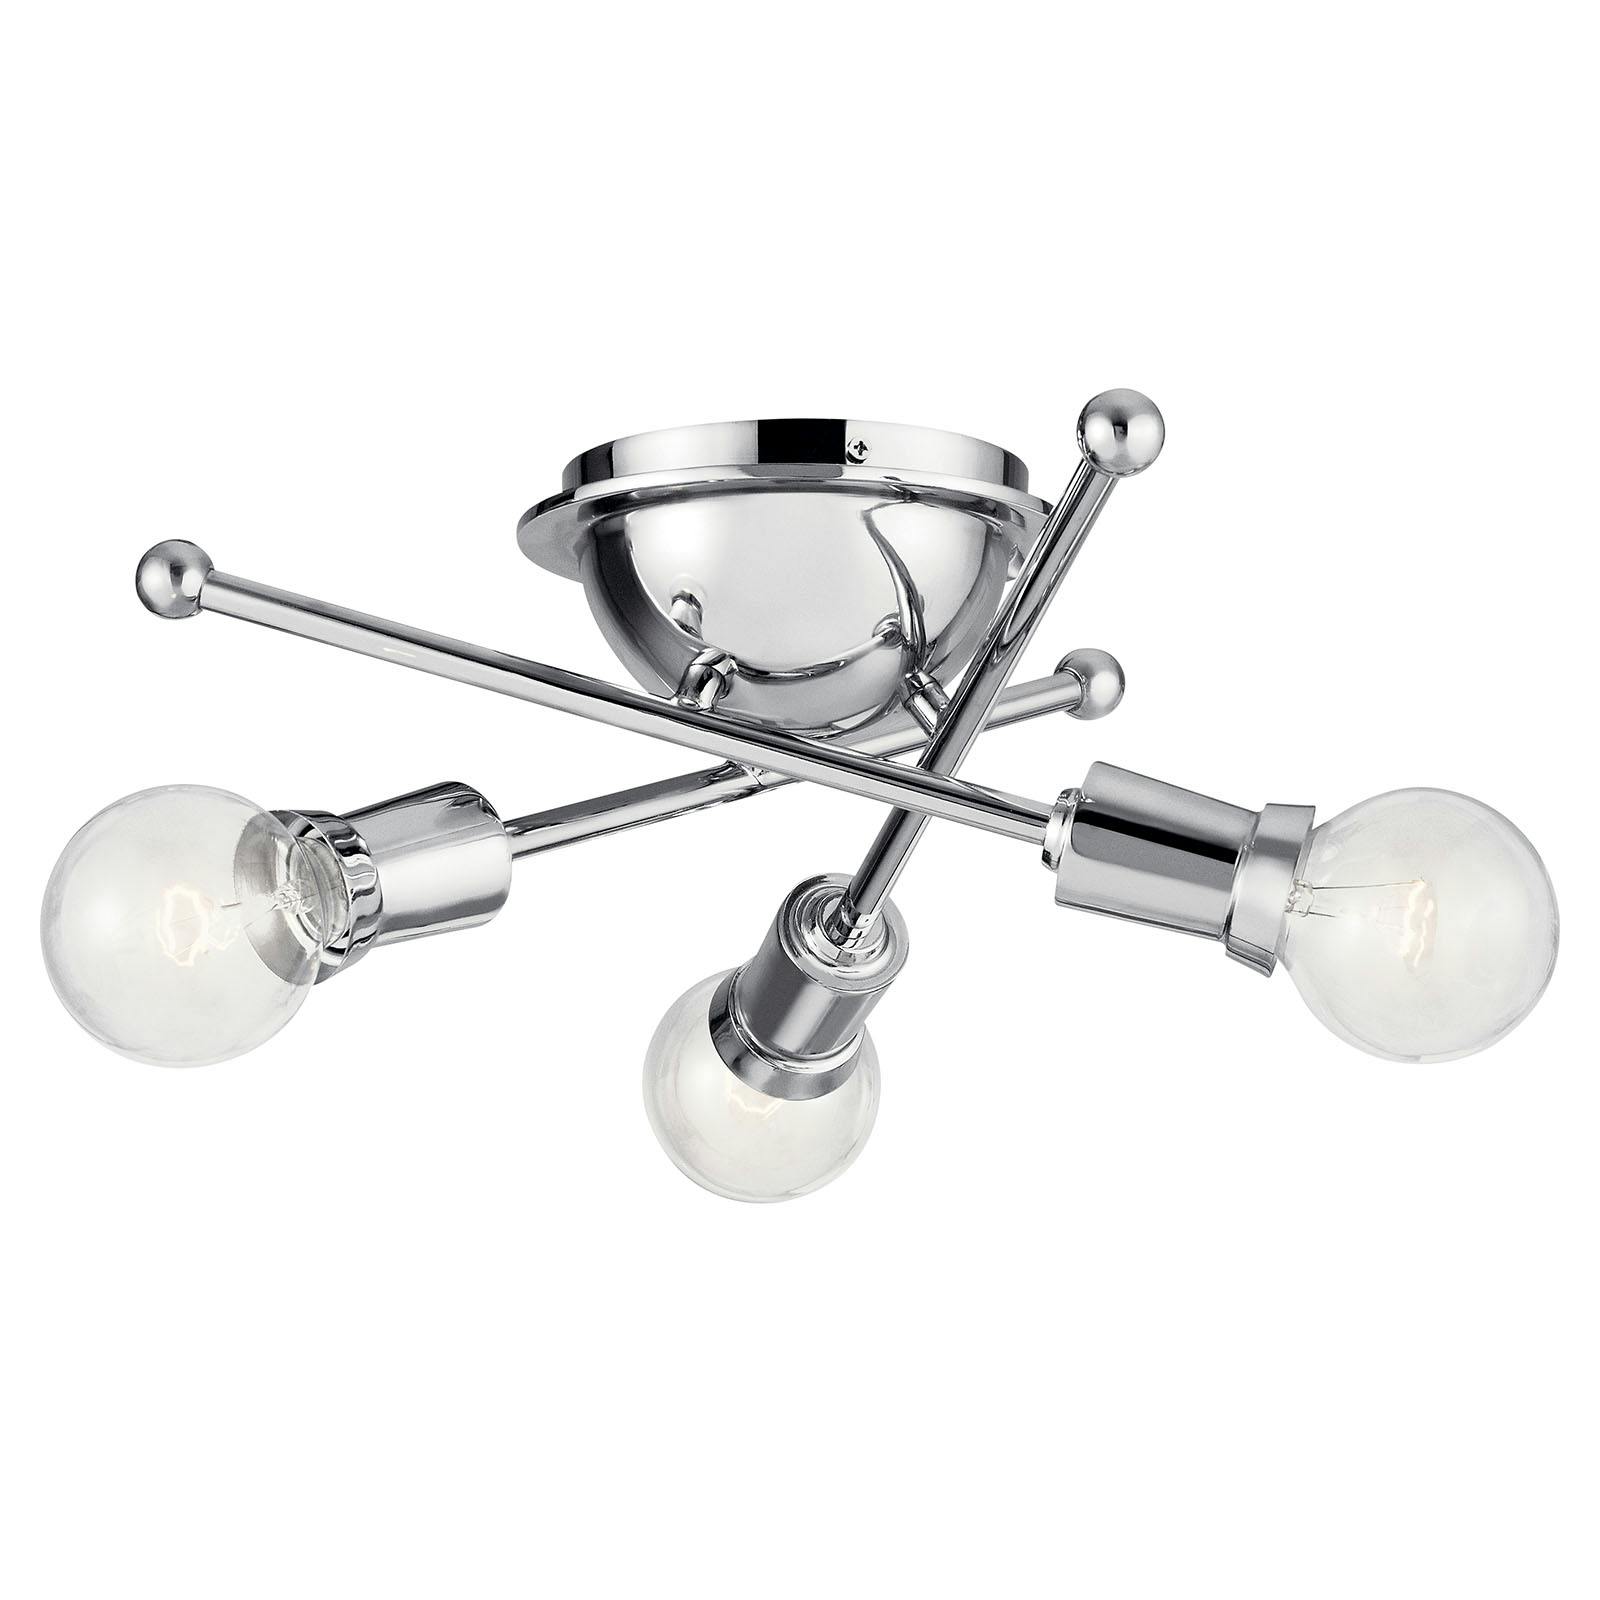 Armstrong 3 Light Flush Mount Chrome on a white background